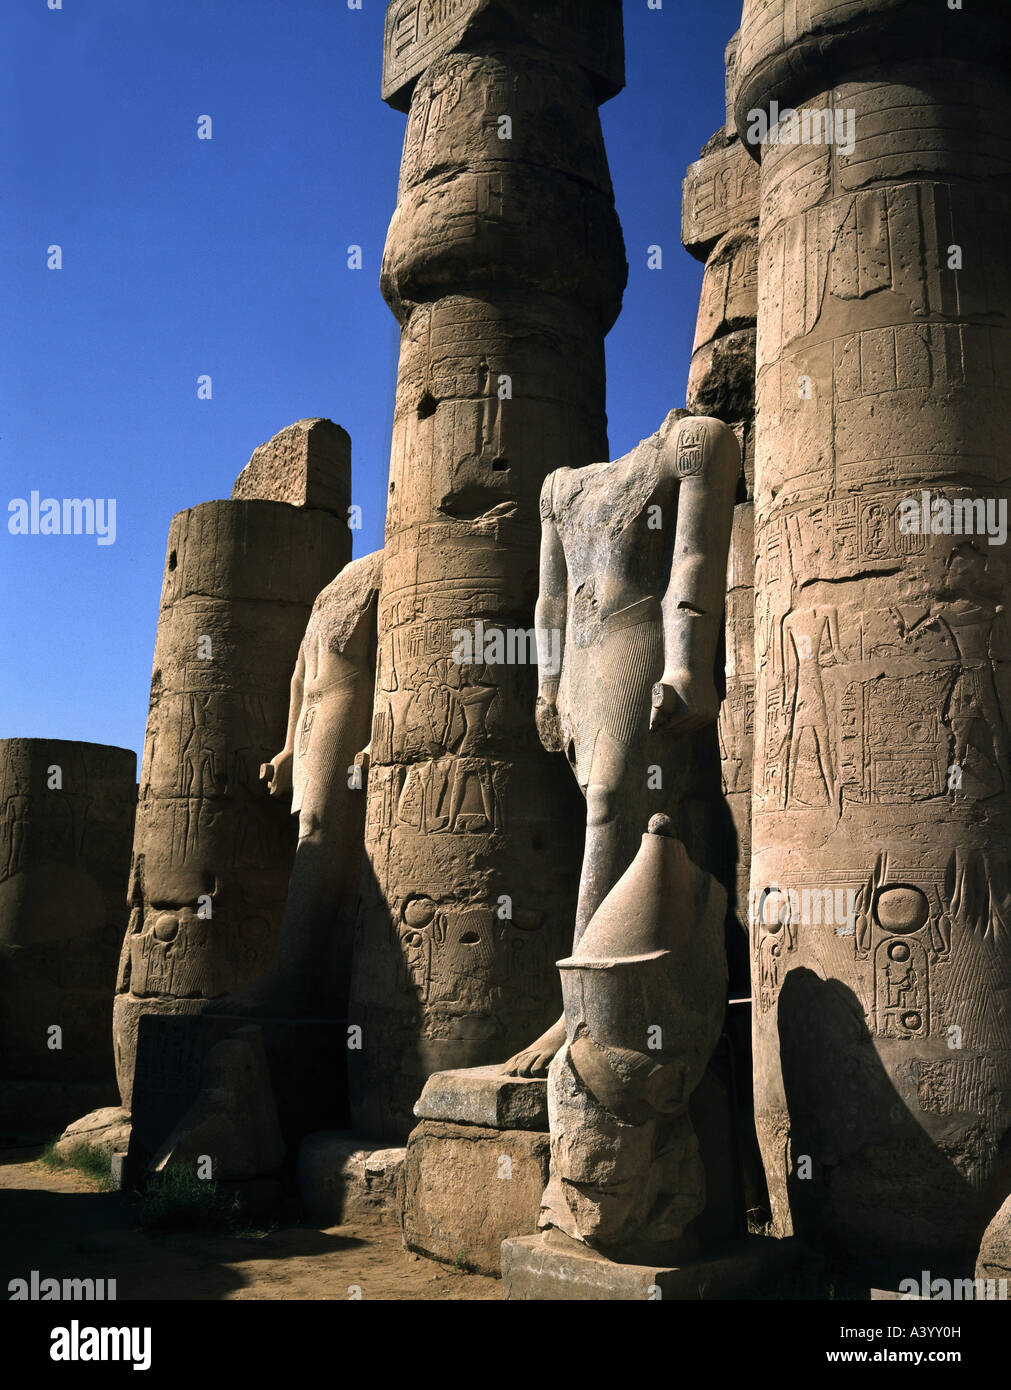 travel /geography, Egypt, Luxor, buildings, temple, Theban divine family Amun, Mut, Chons, exterior view, temple of Ramesses II, southern part, statues of pharaoh Amenhotep III, architect Amenhotep son of Hapu, 1402 - 1364 B.C., extensions under Ramesses II, 1303 - 1236 B.C., historic, historical, Africa, architecture, temples, ancient world, New Kingdom, 18th / 19th dynasty, 15th - 13th century B.C., column, columns, statue, sculpture, sculptures, ancient world, Stock Photo